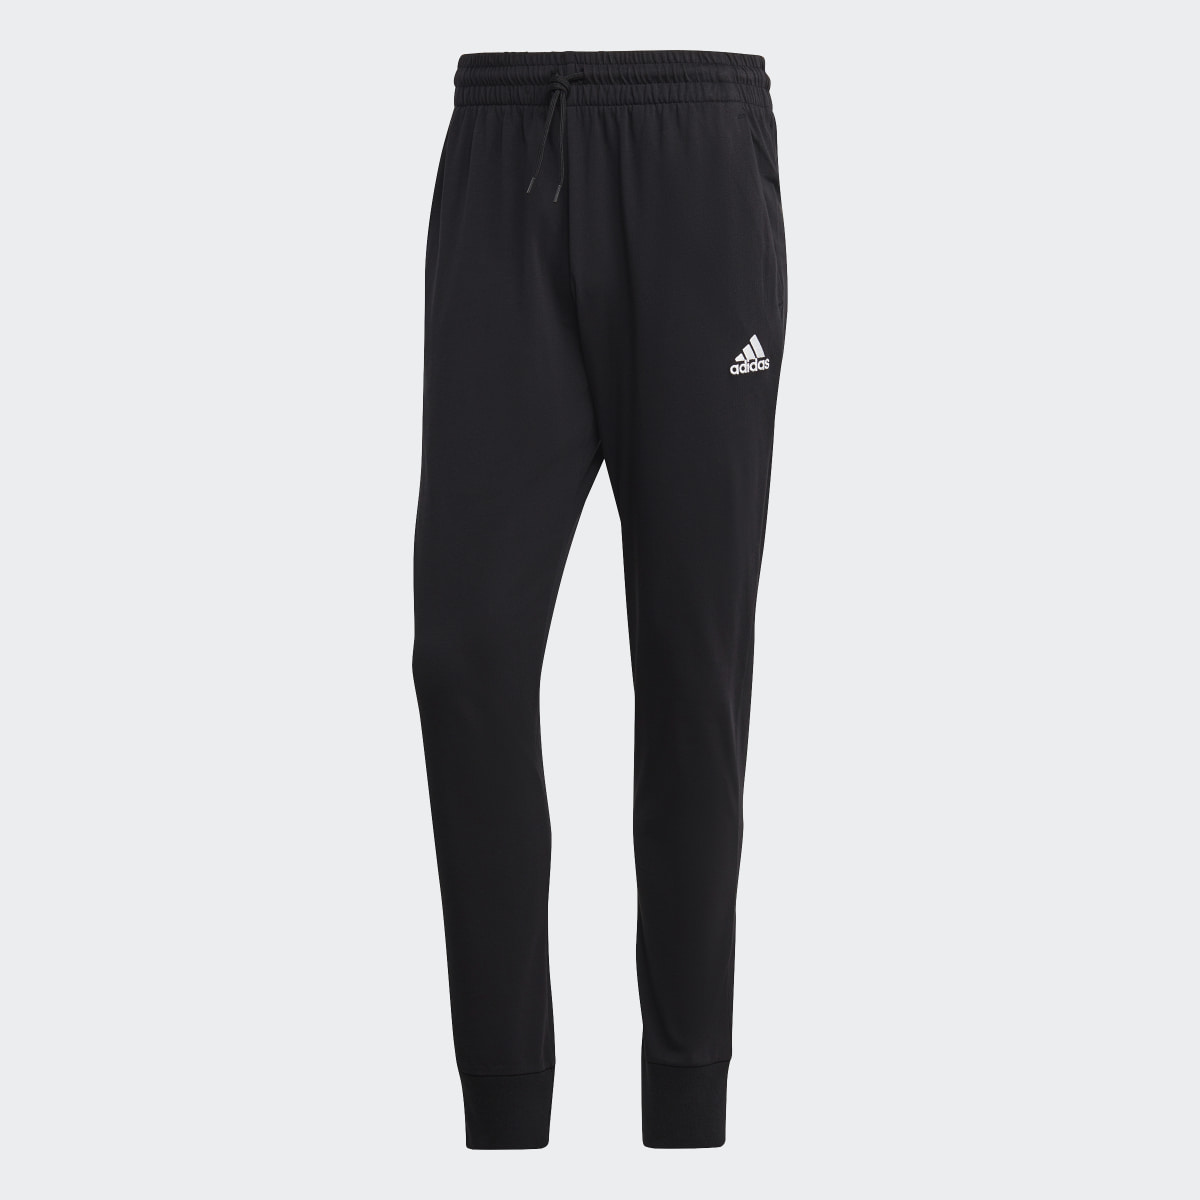 Adidas Essentials Single Jersey Tapered Cuff Pants. 5